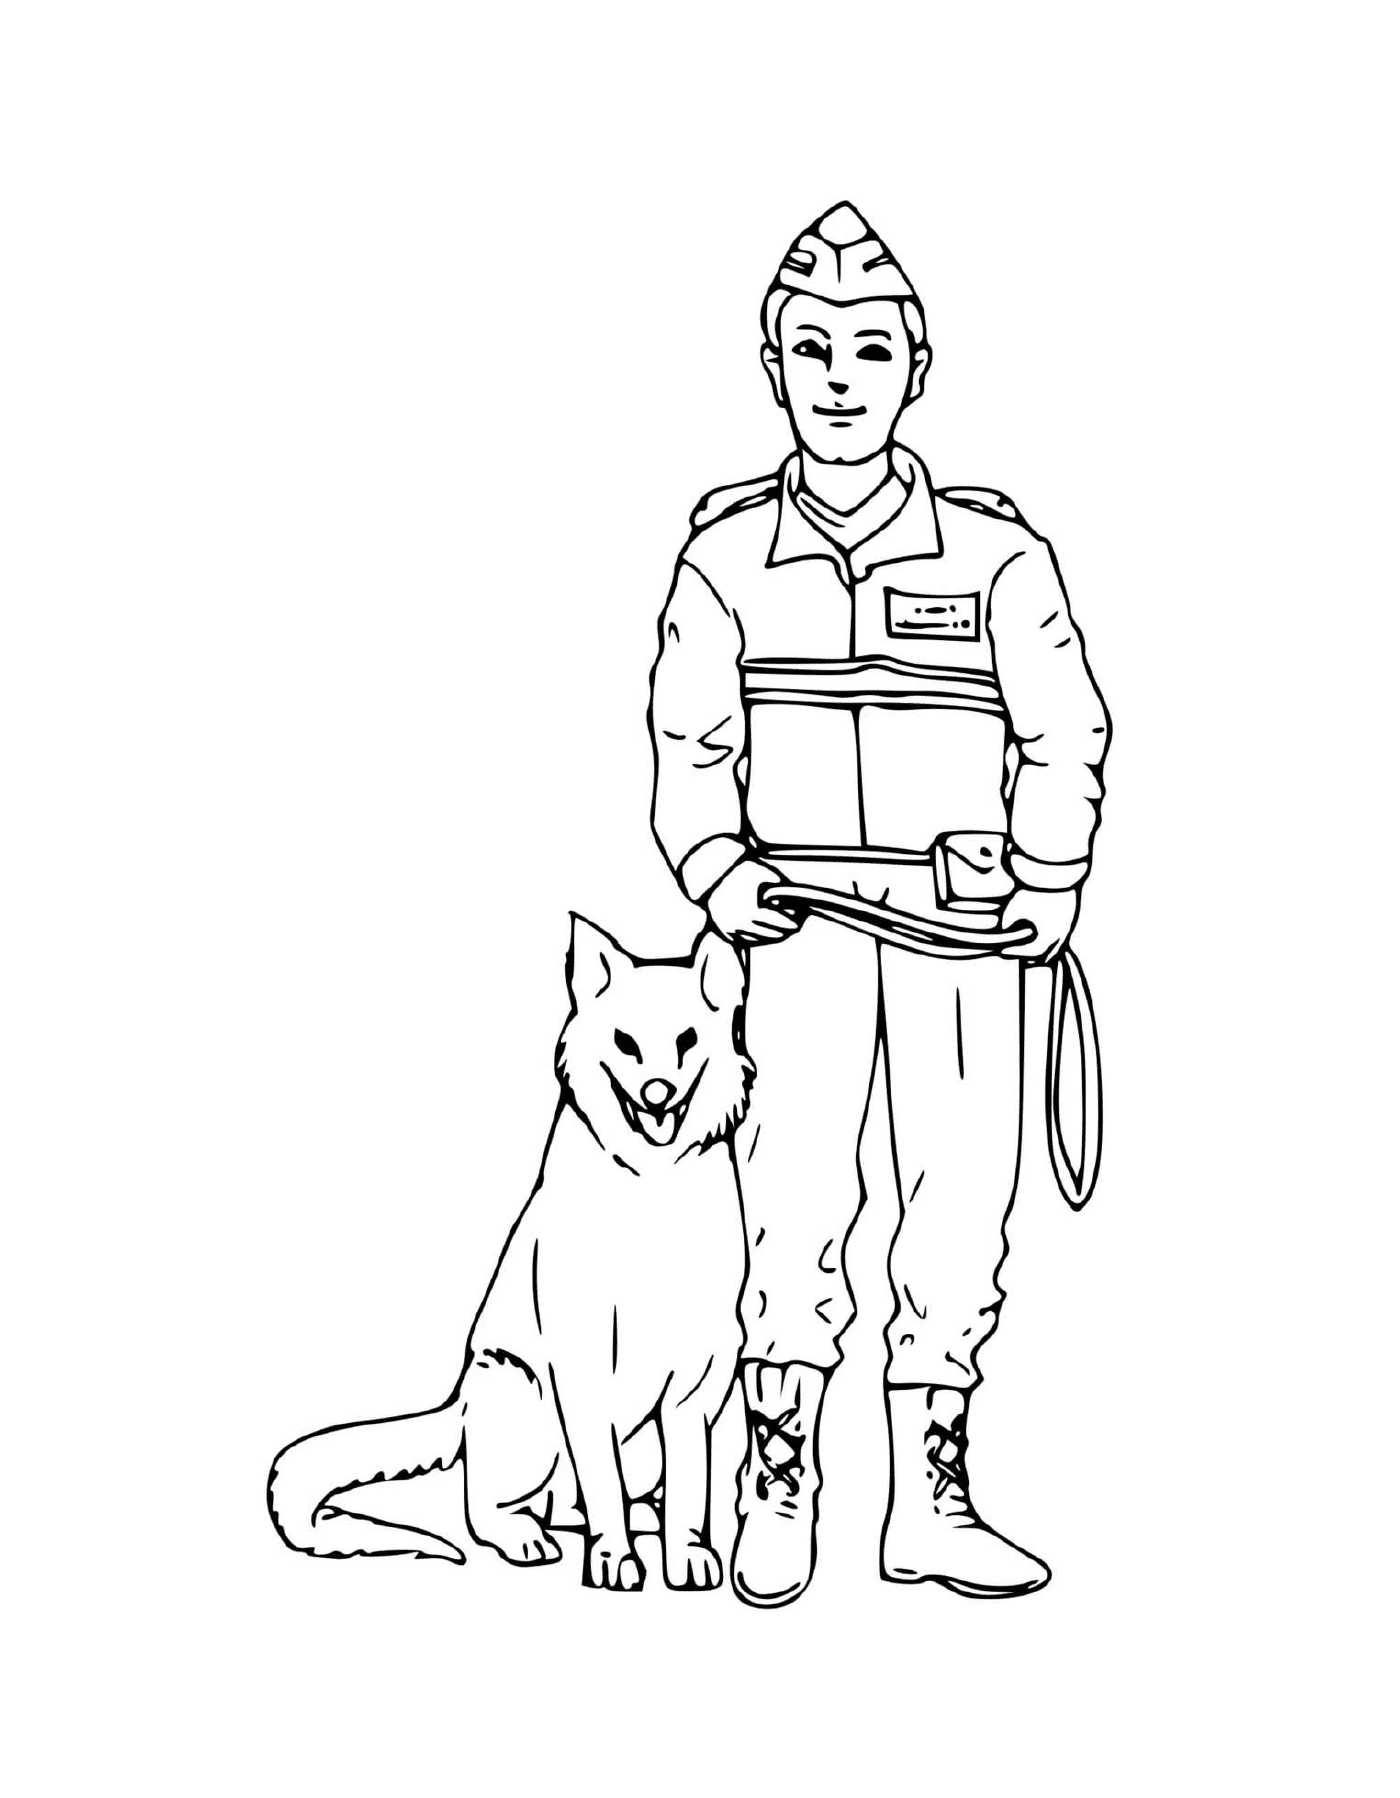  Police Dog and Officer 